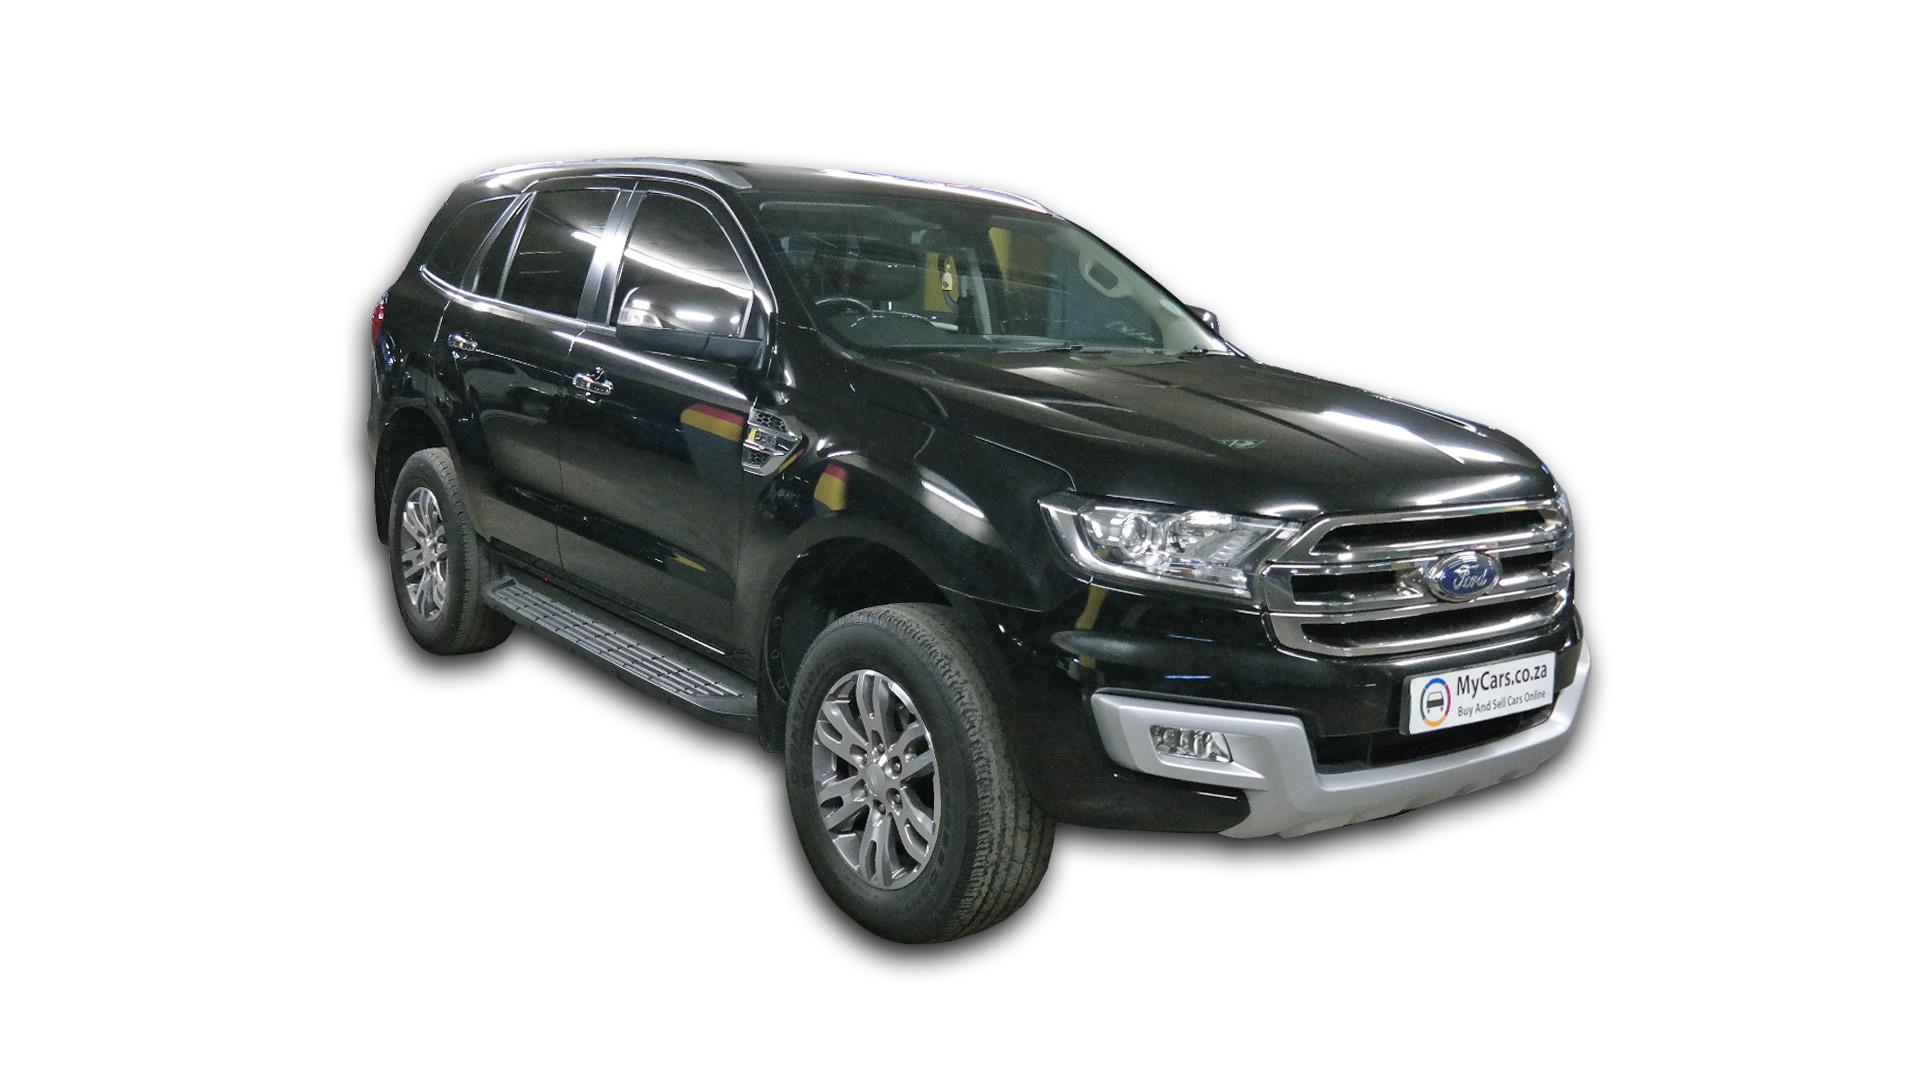 Ford Everest 2.2 Tdci XLT A/T